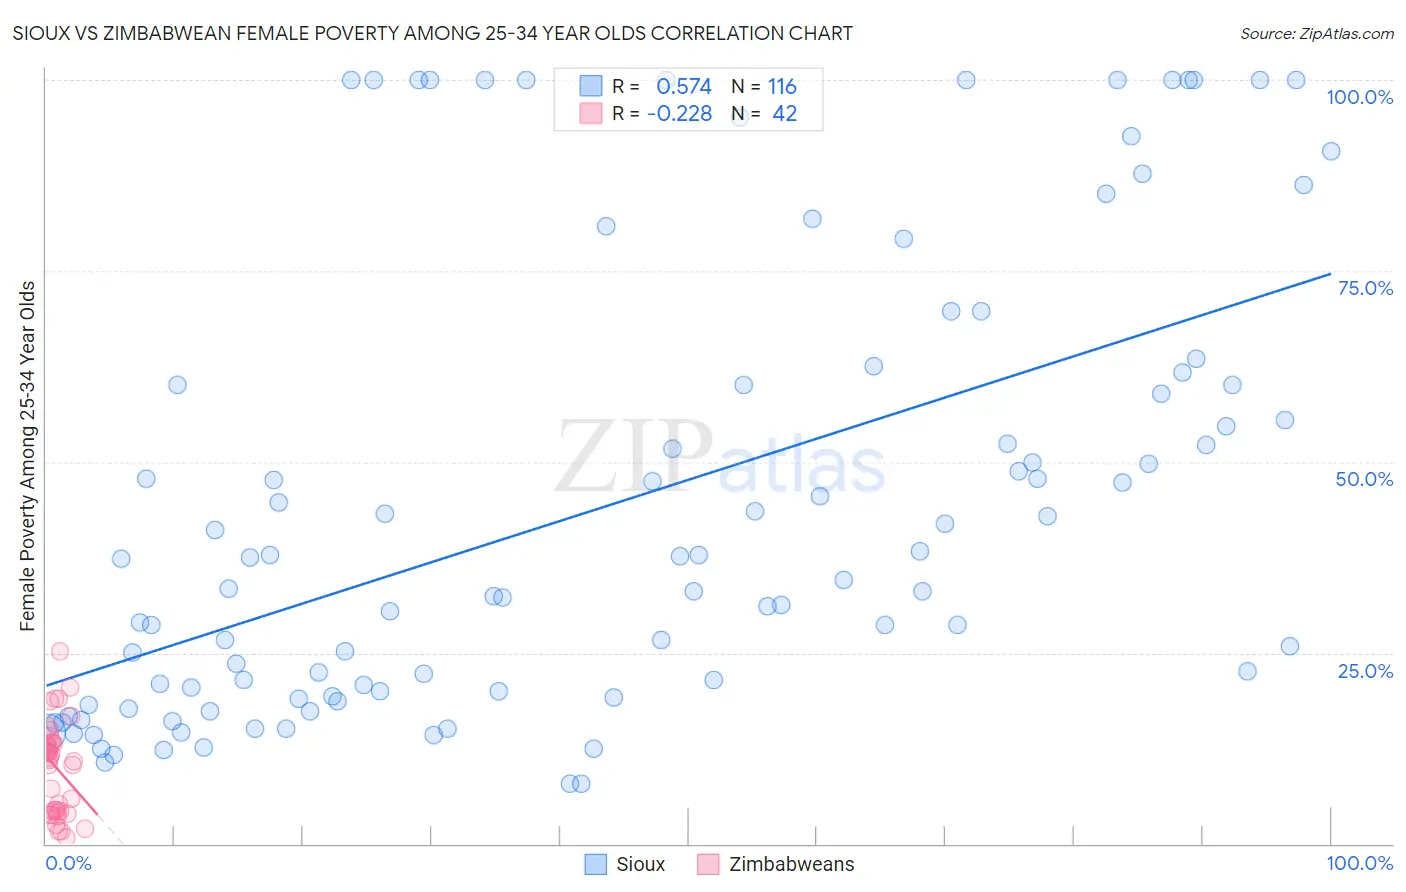 Sioux vs Zimbabwean Female Poverty Among 25-34 Year Olds